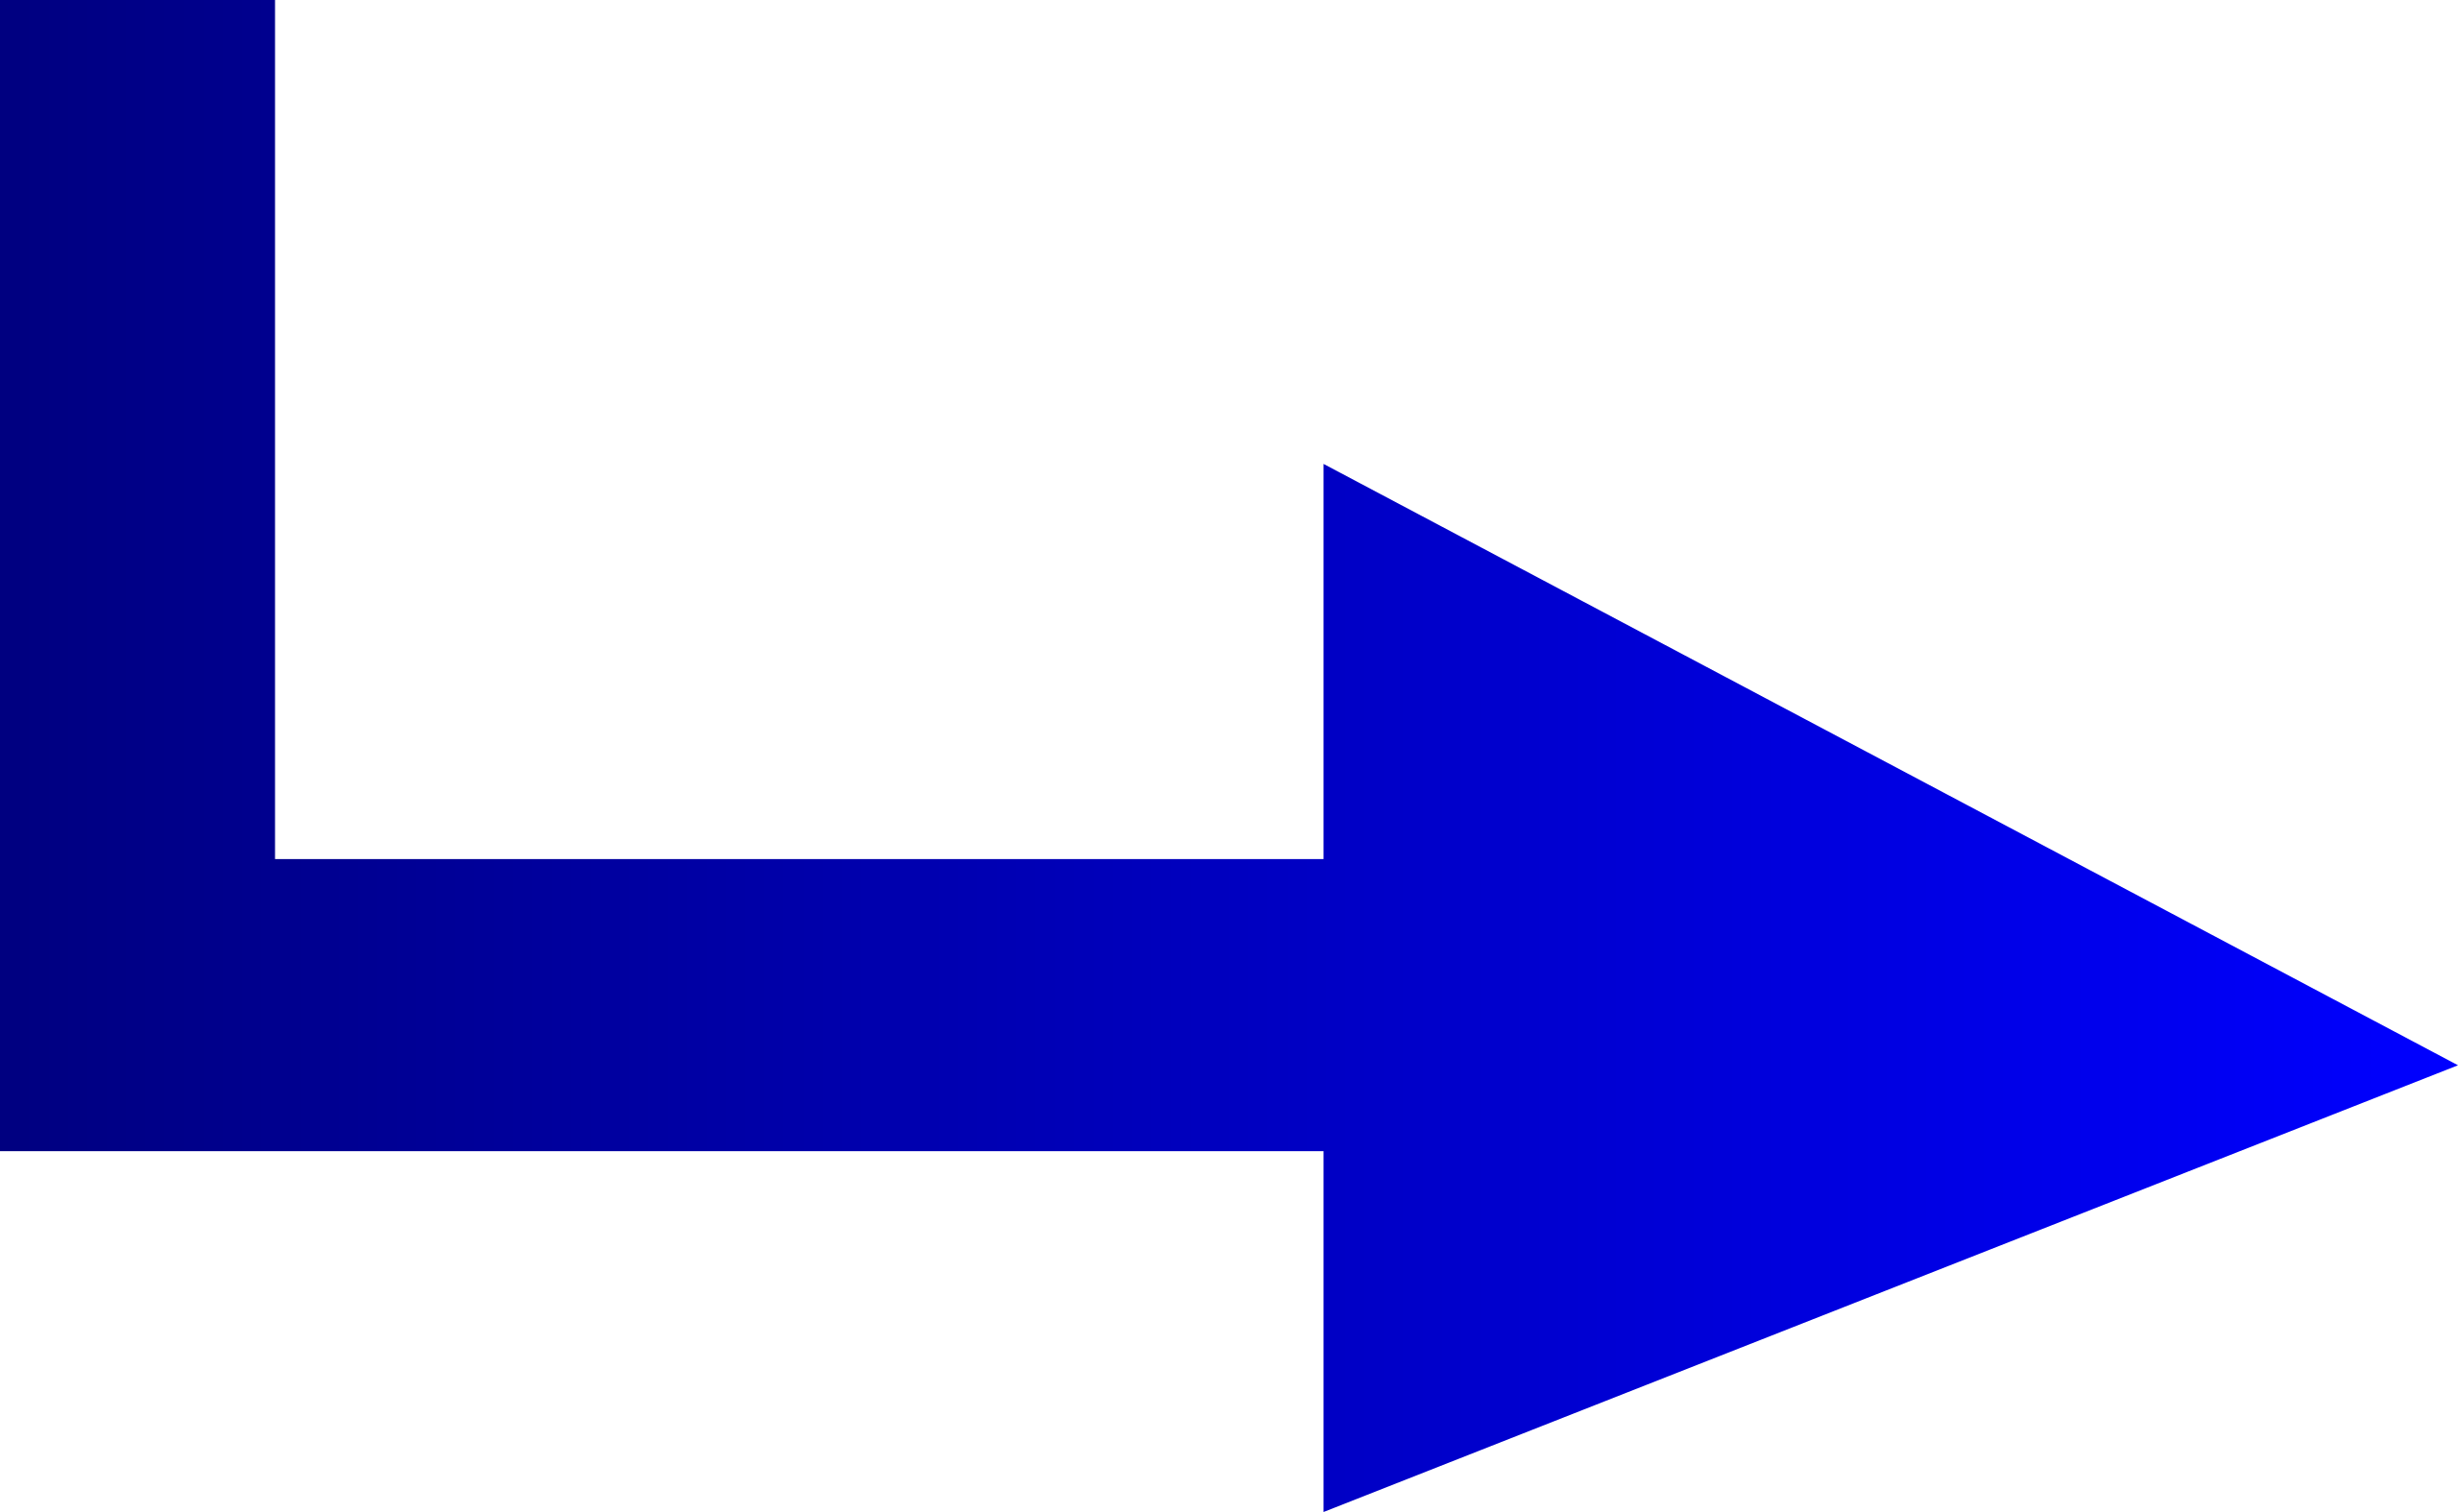 File:Blue-White Gradient.svg - Wikimedia Commons